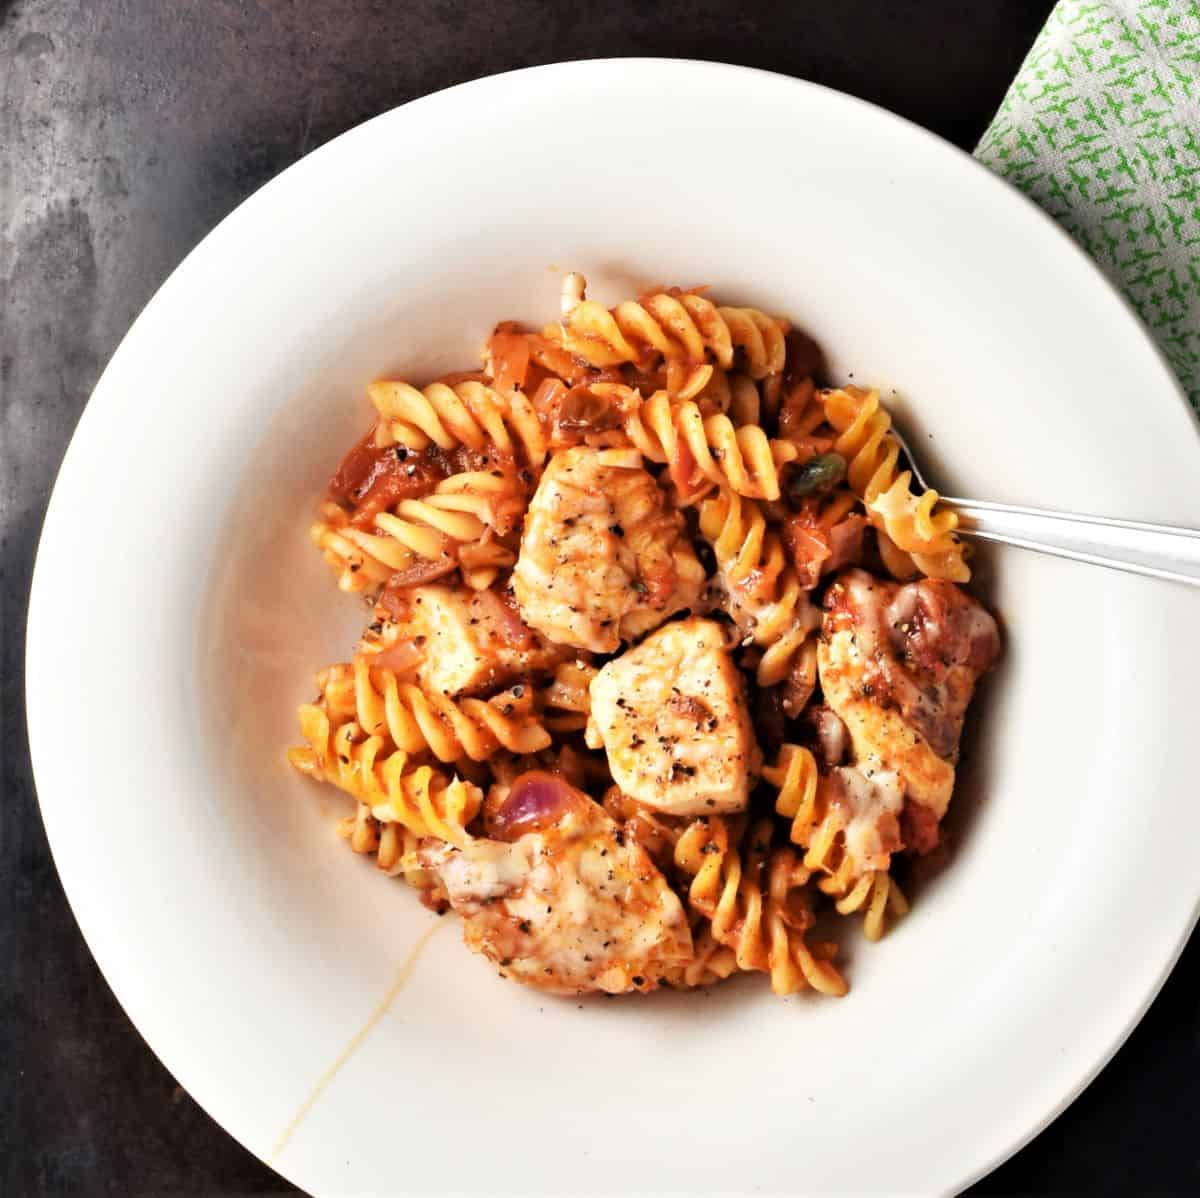 Chicken and pasta with tomato sauce in white dish.